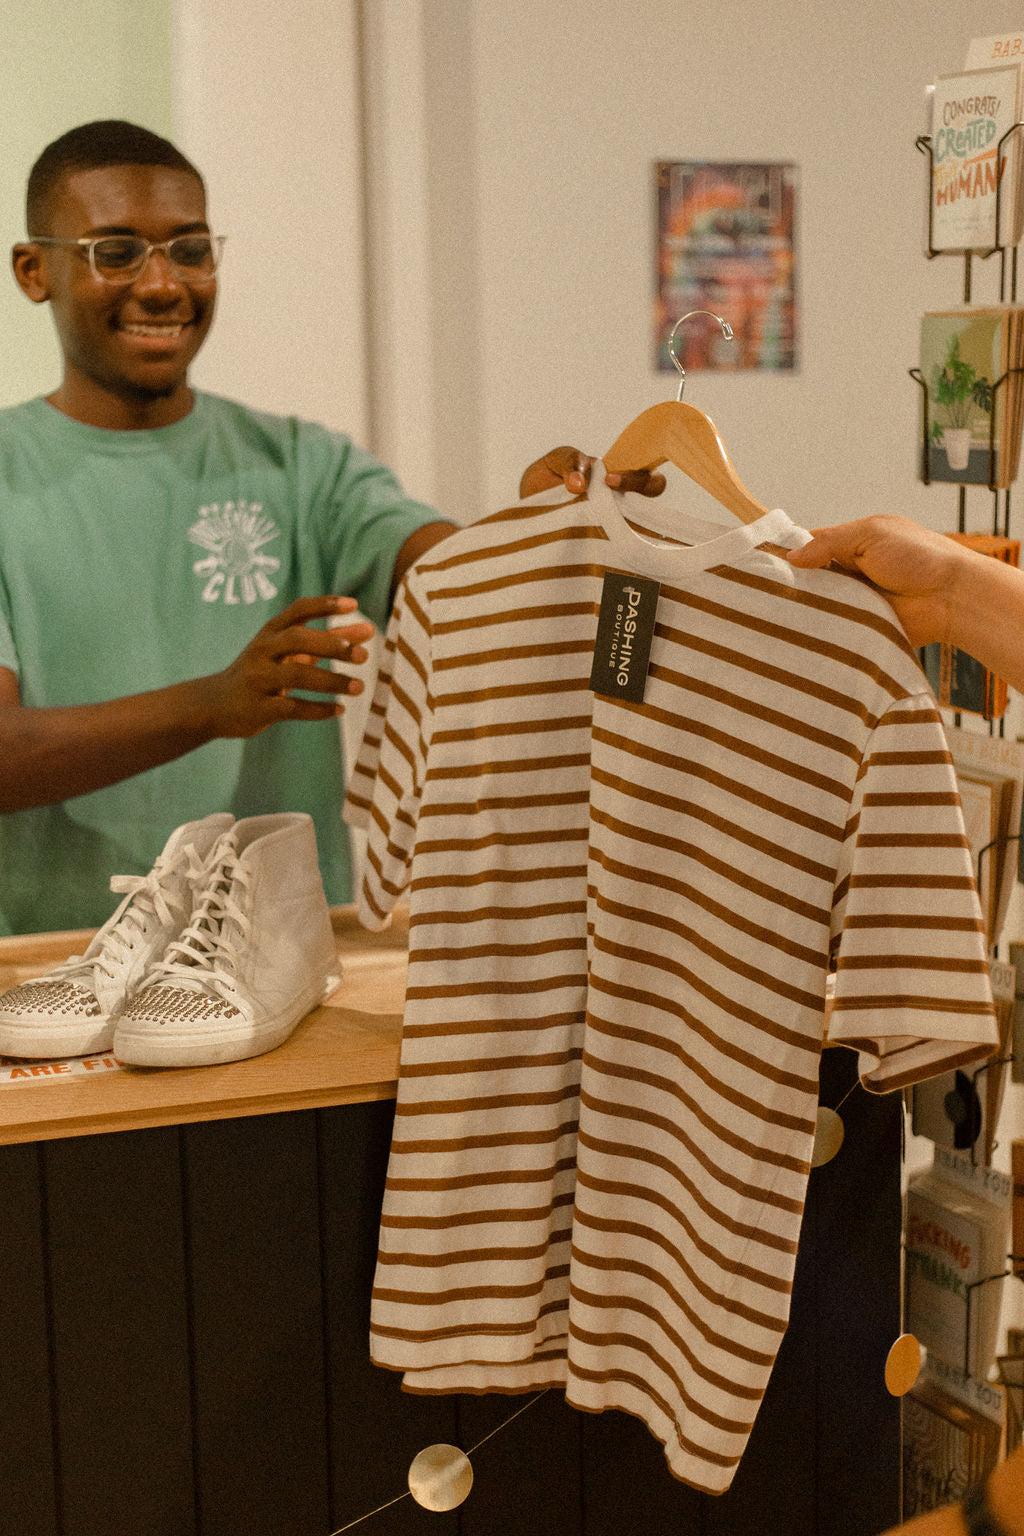 Person checking out at Darling x Dashing in downtown charlottesville. They are handing a striped shirt to a smiling employee